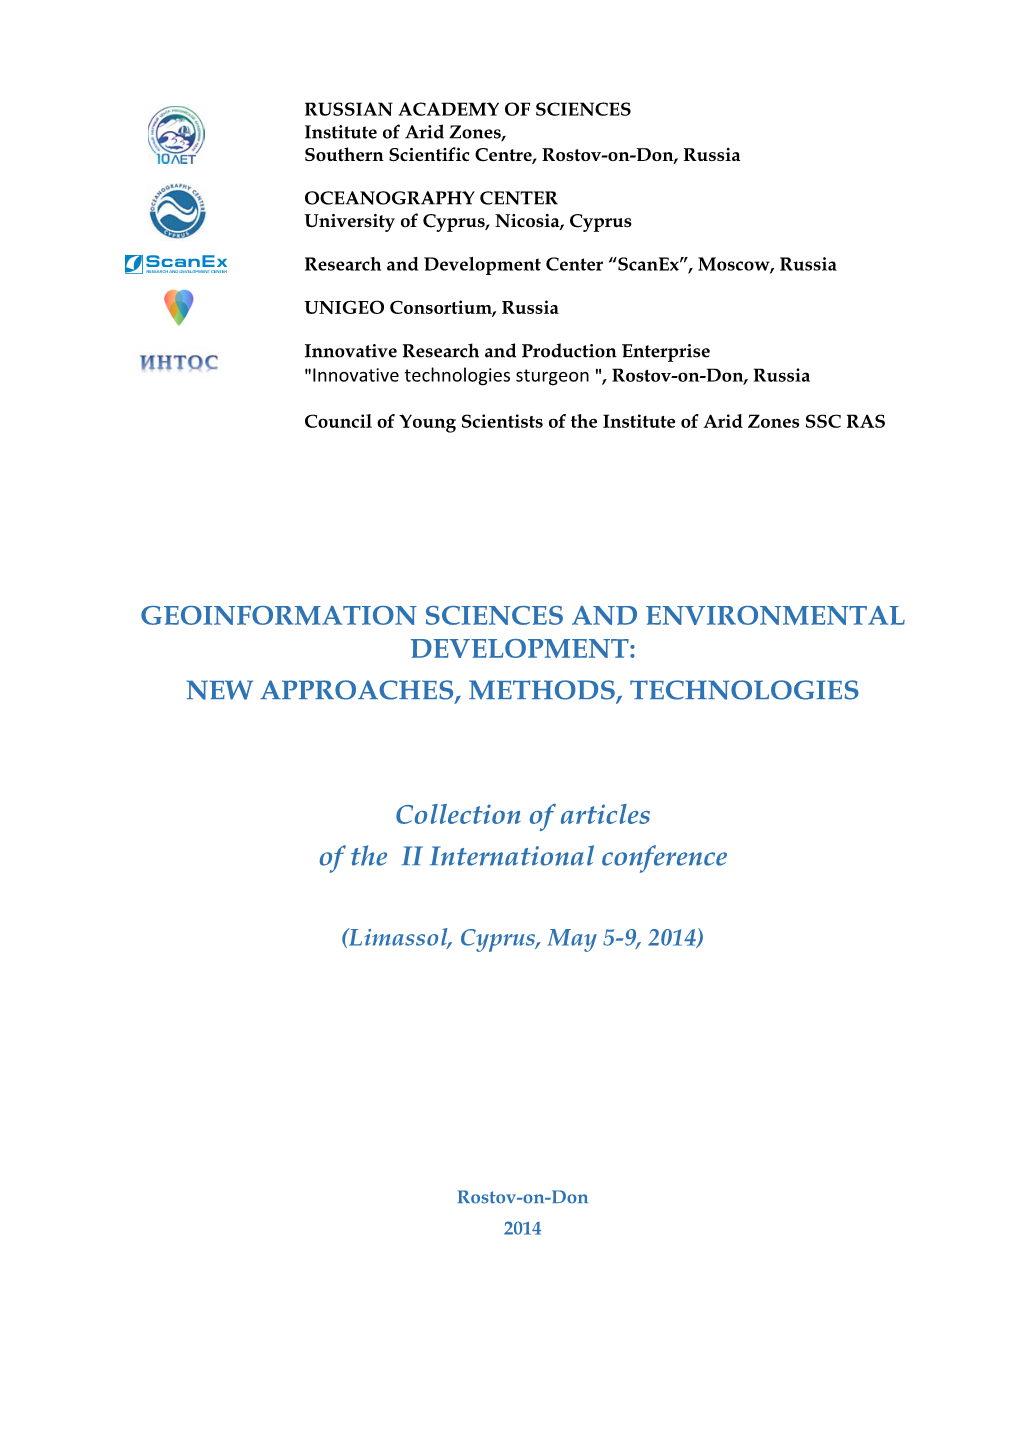 NEW APPROACHES, METHODS, TECHNOLOGIES Collection Of